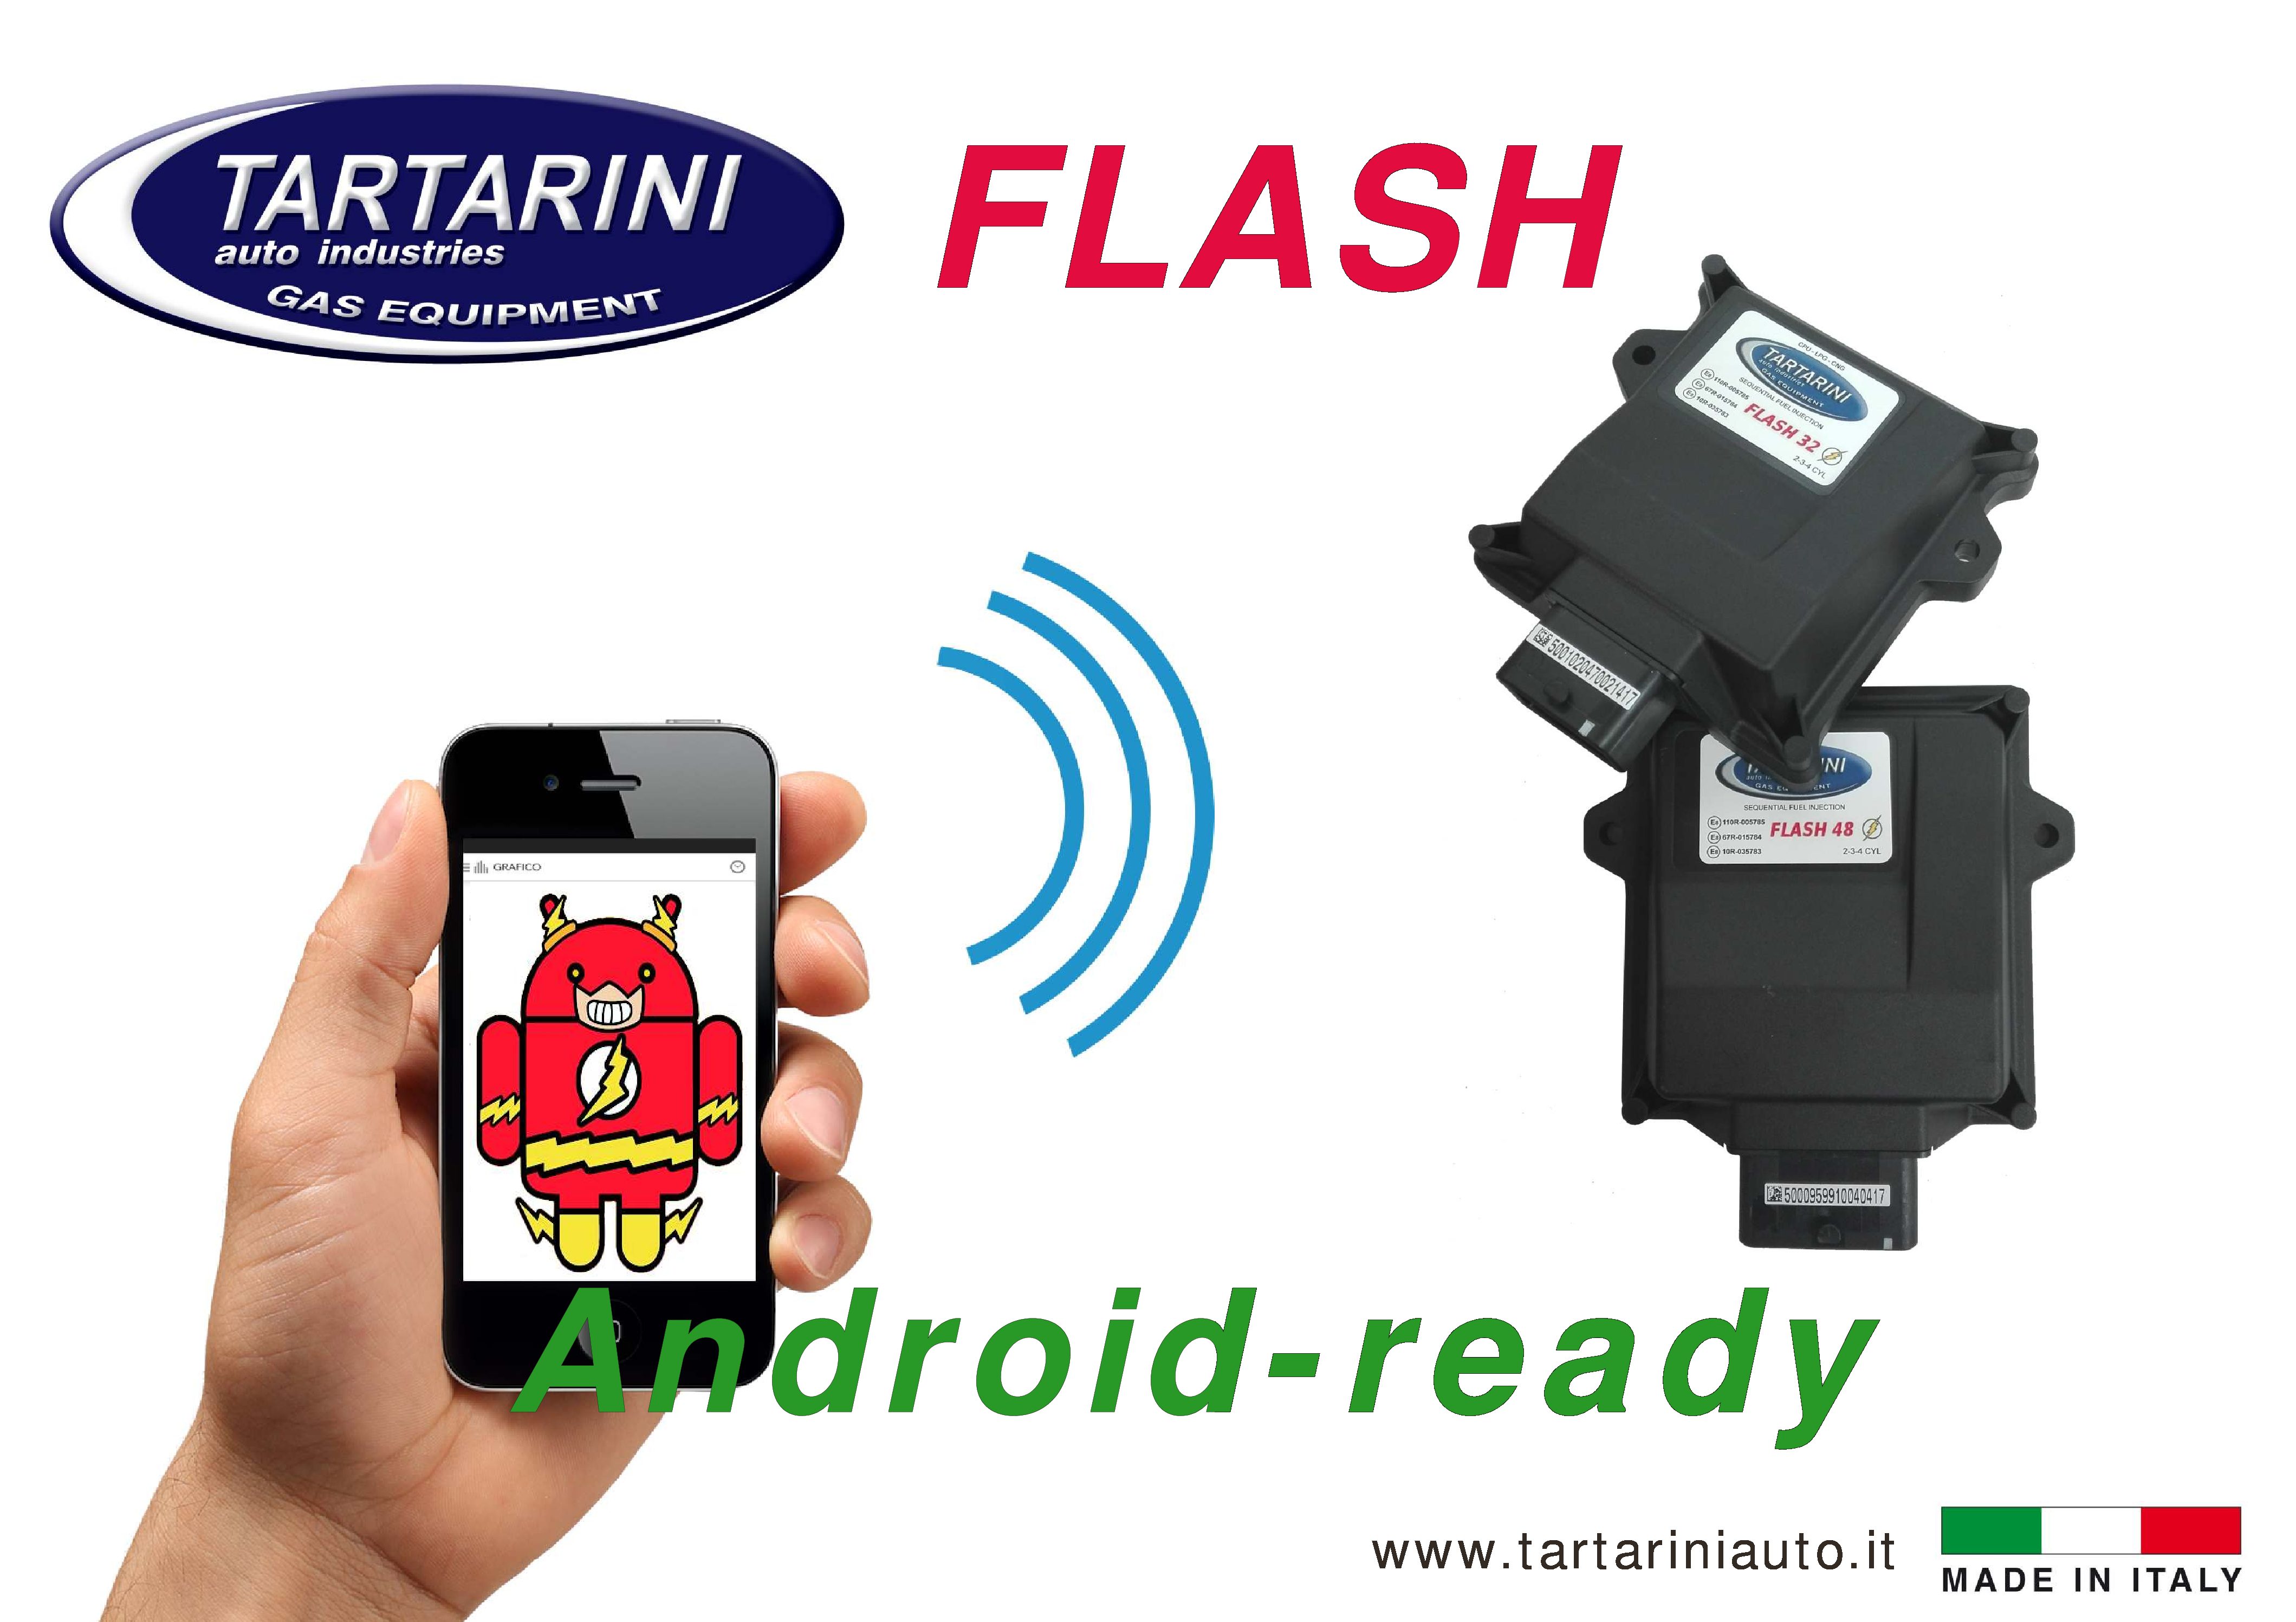 Tartarini sequential fuel injection software